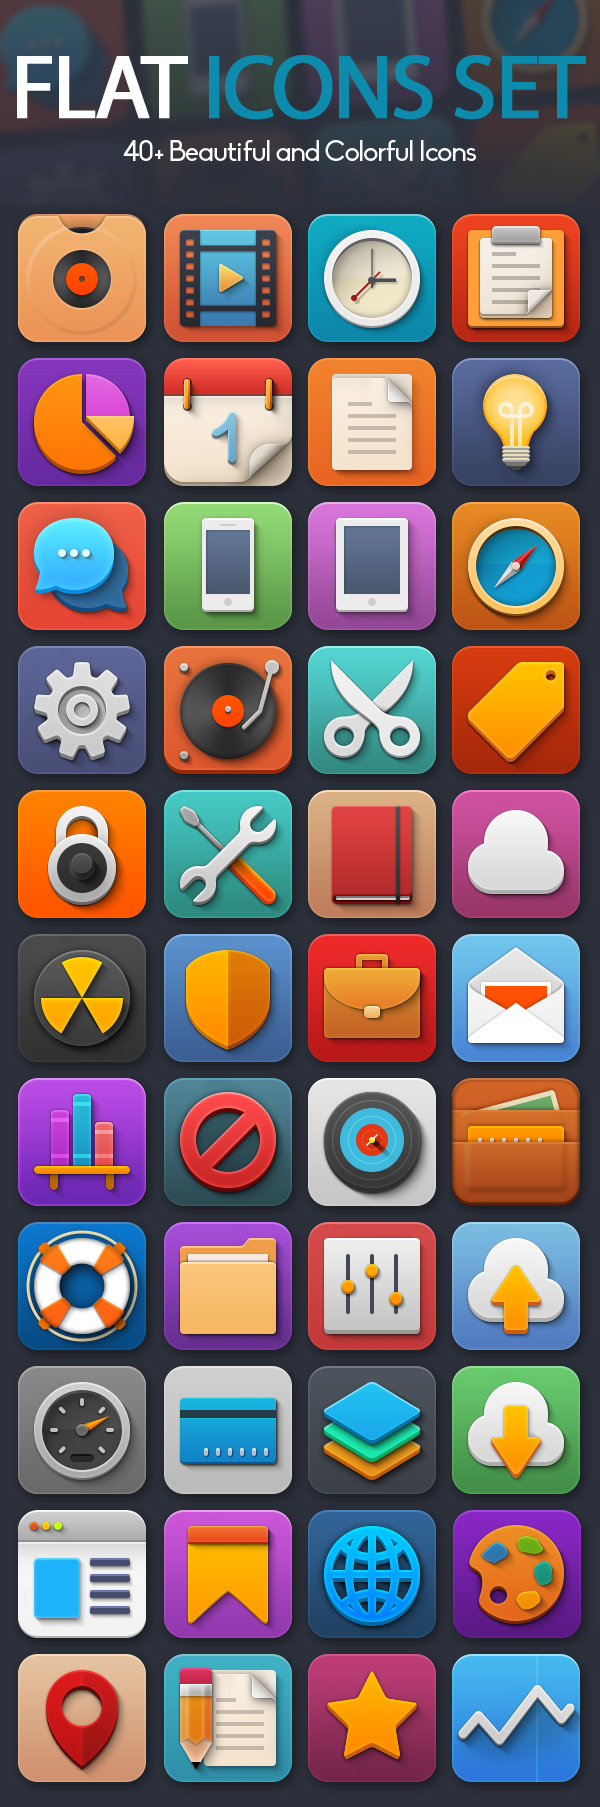 Beautiful-colorful-Flat-icons-set-preview